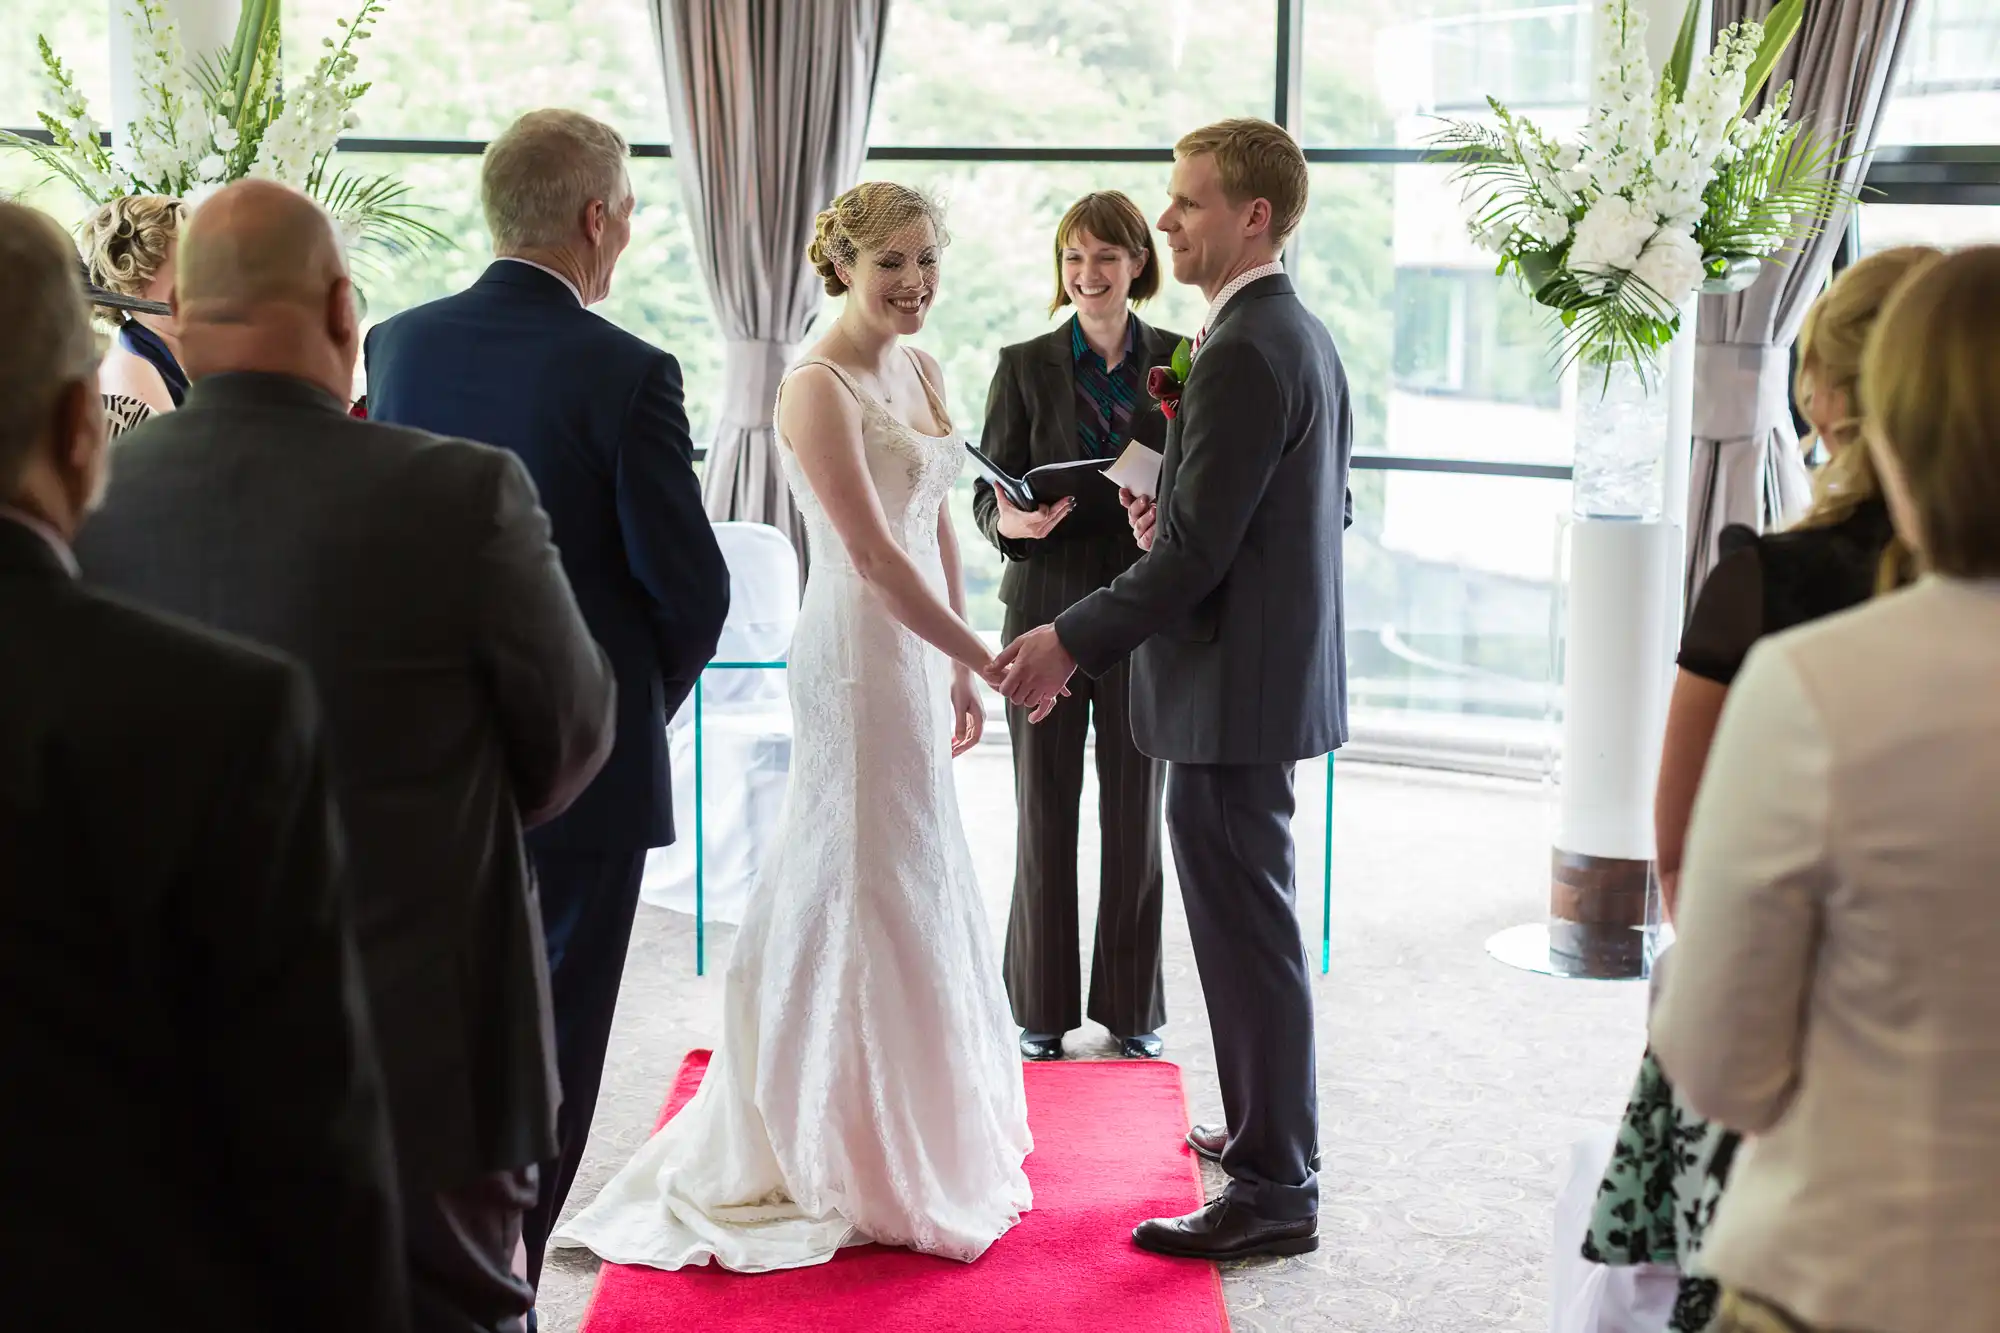 A bride and groom holding hands at their wedding ceremony, standing on a red carpet with an officiant and guests surrounding them.